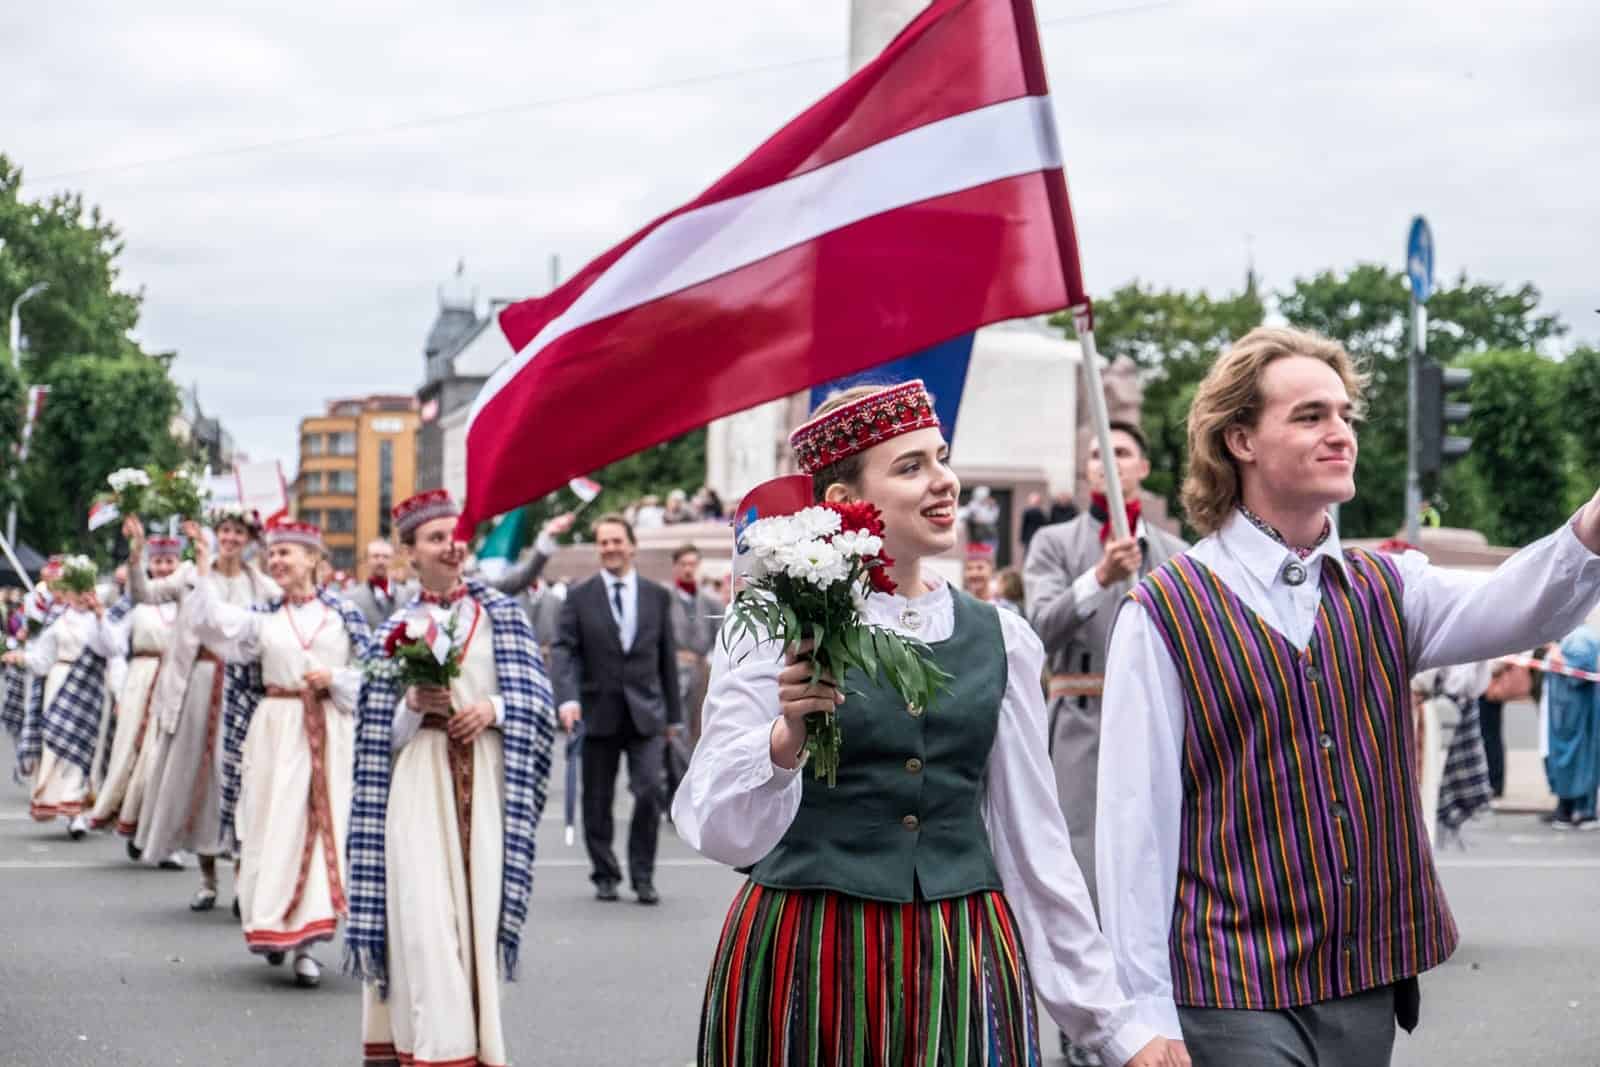 People waving to the crowd at the Song Dance Celebration in Latvia